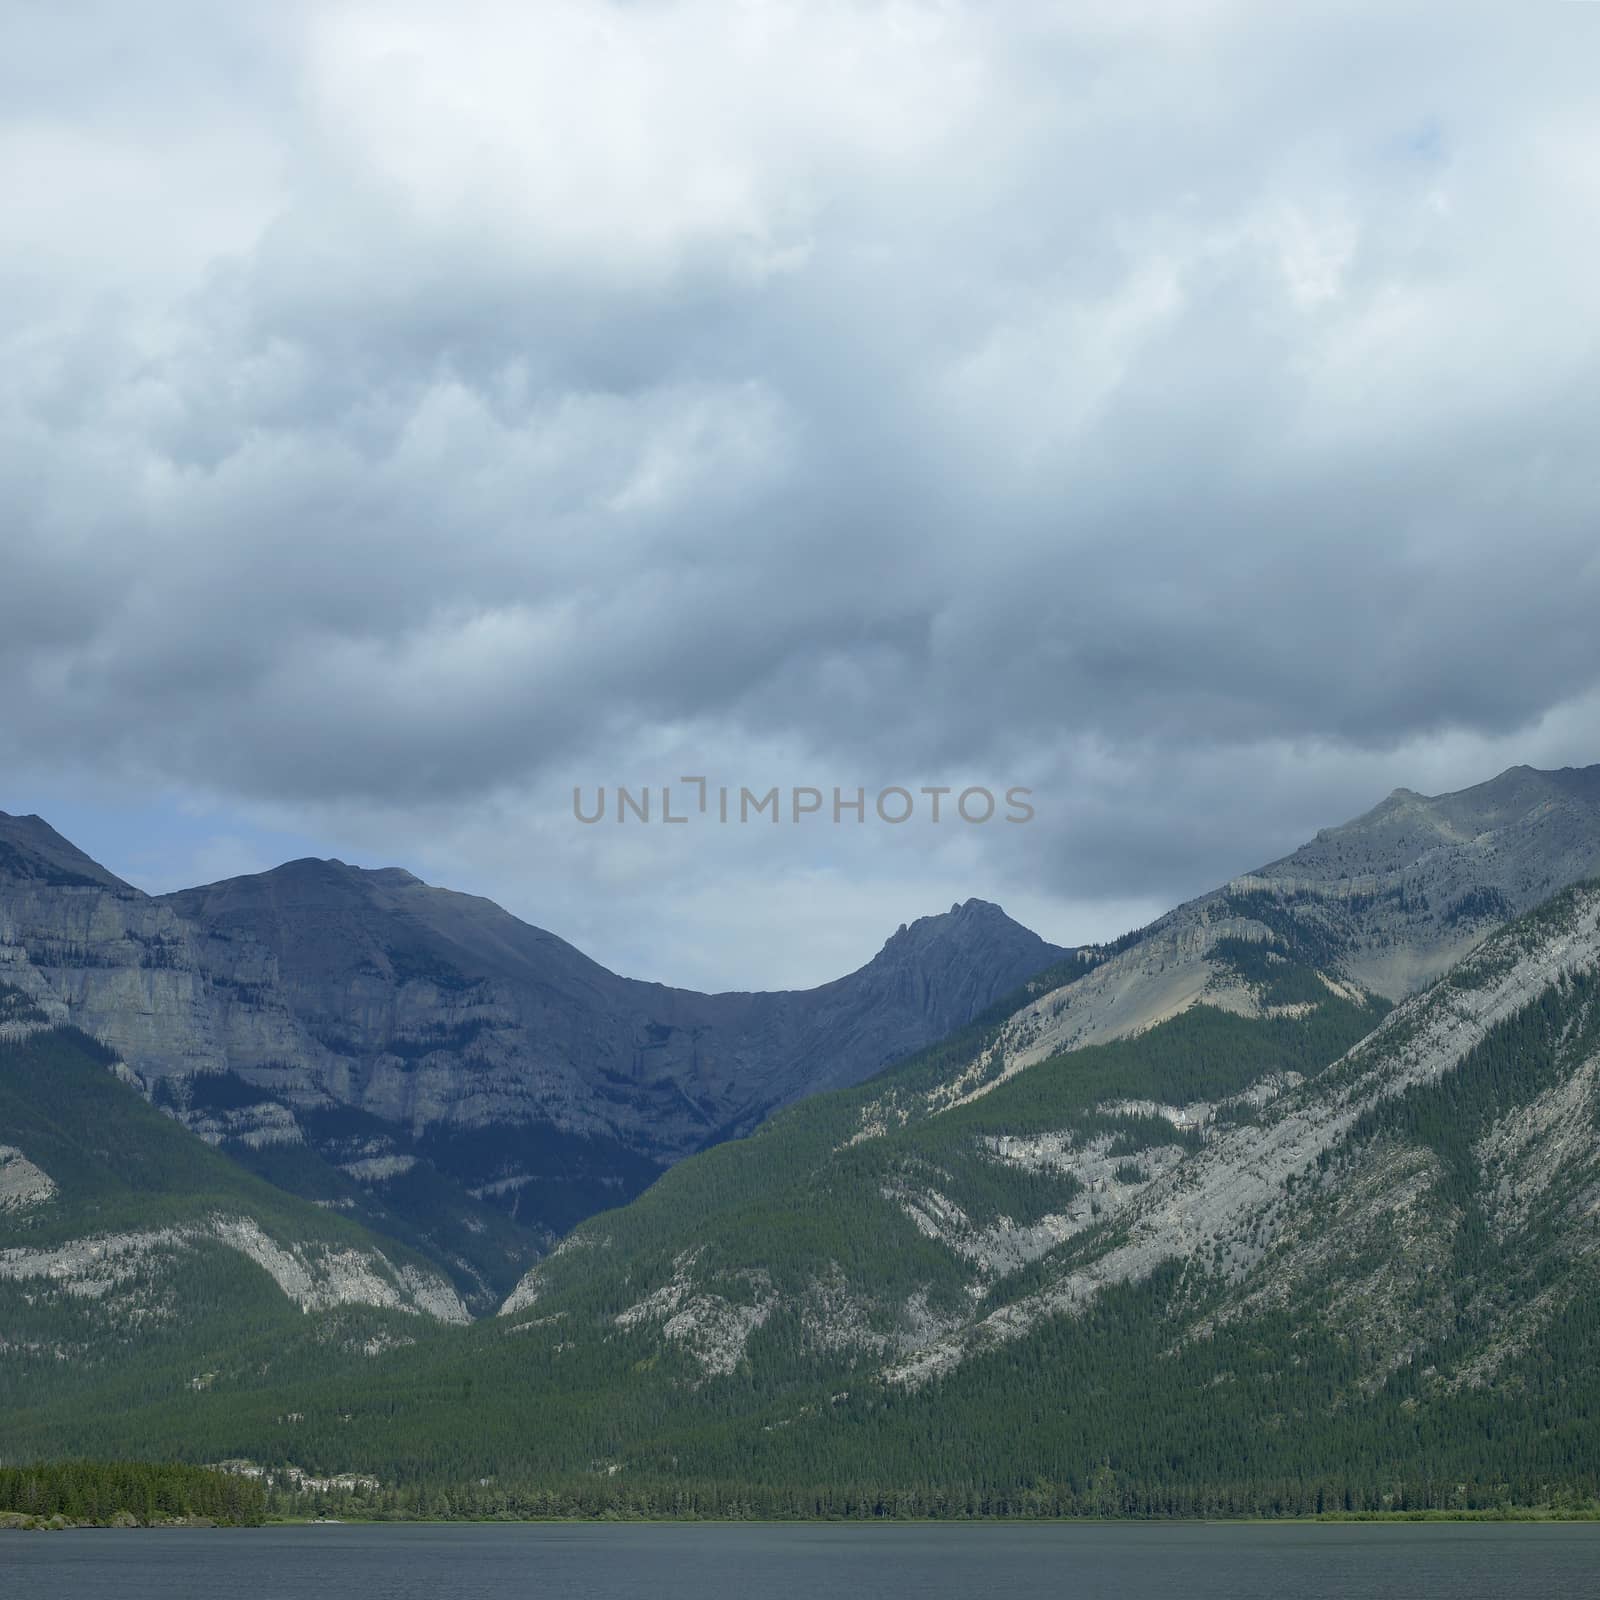 Large rocky mountains with trees and lake